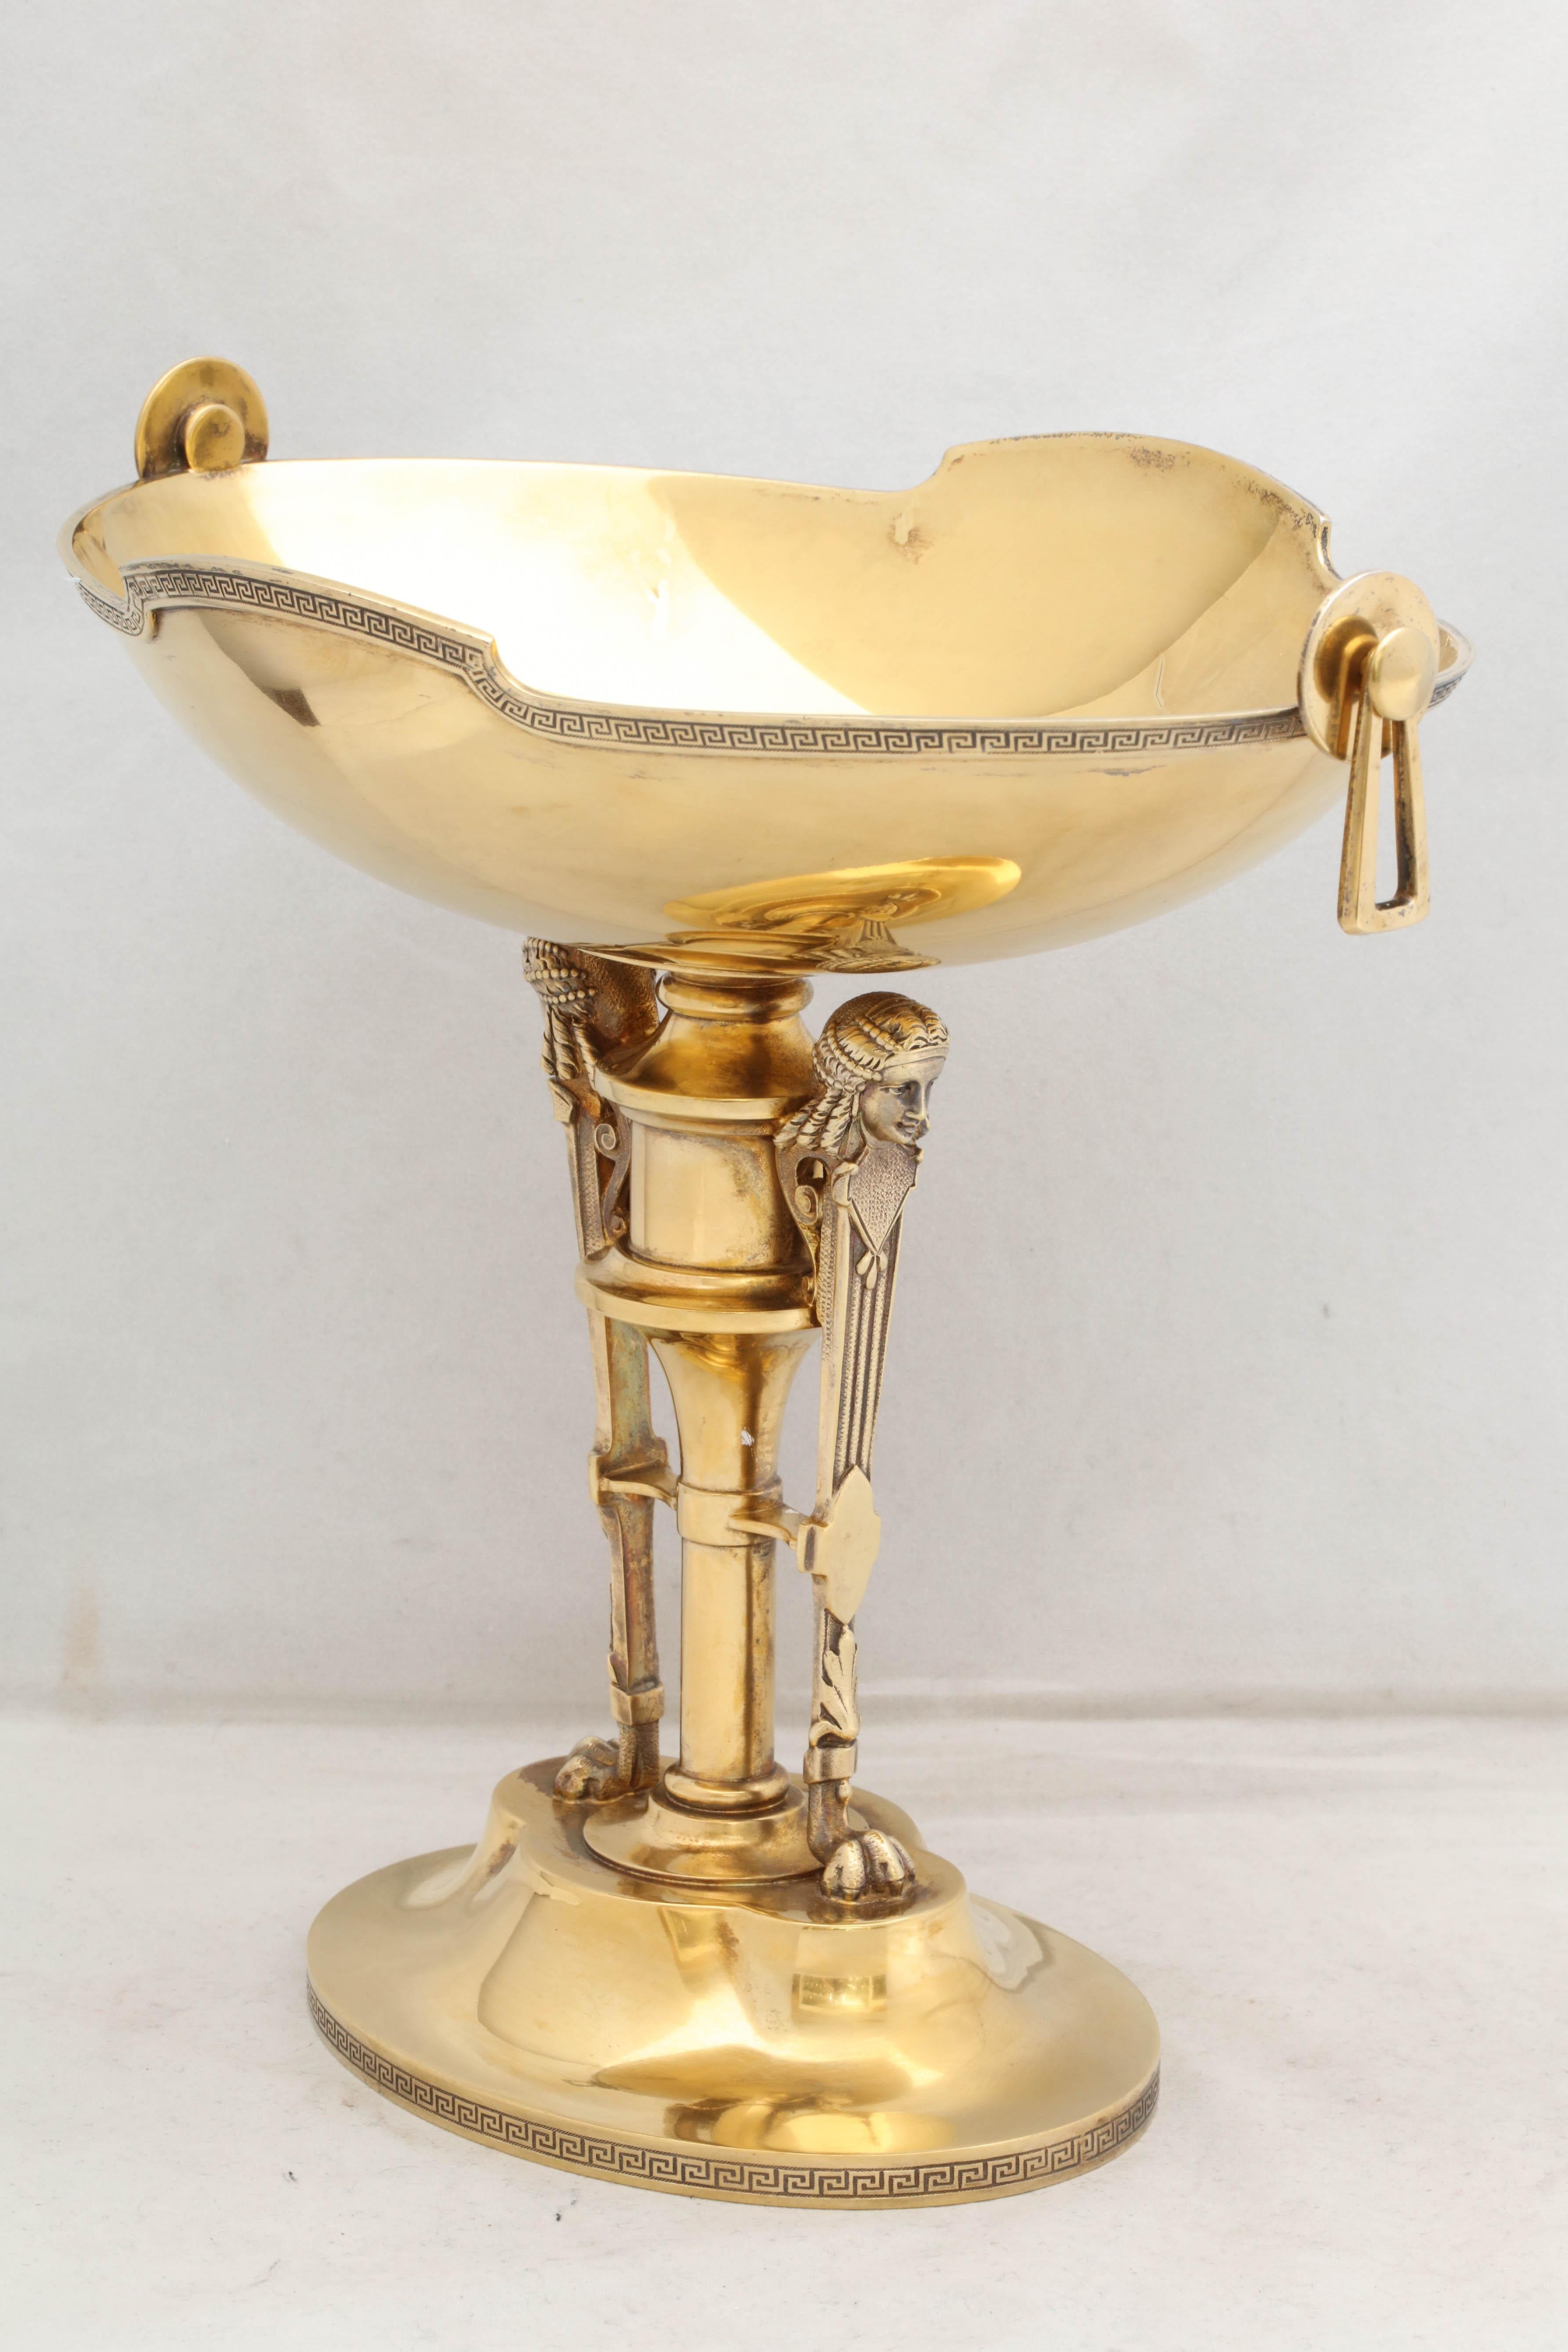 Neoclassical Sterling Silver Gilt Centrepiece by Gorham For Sale 7